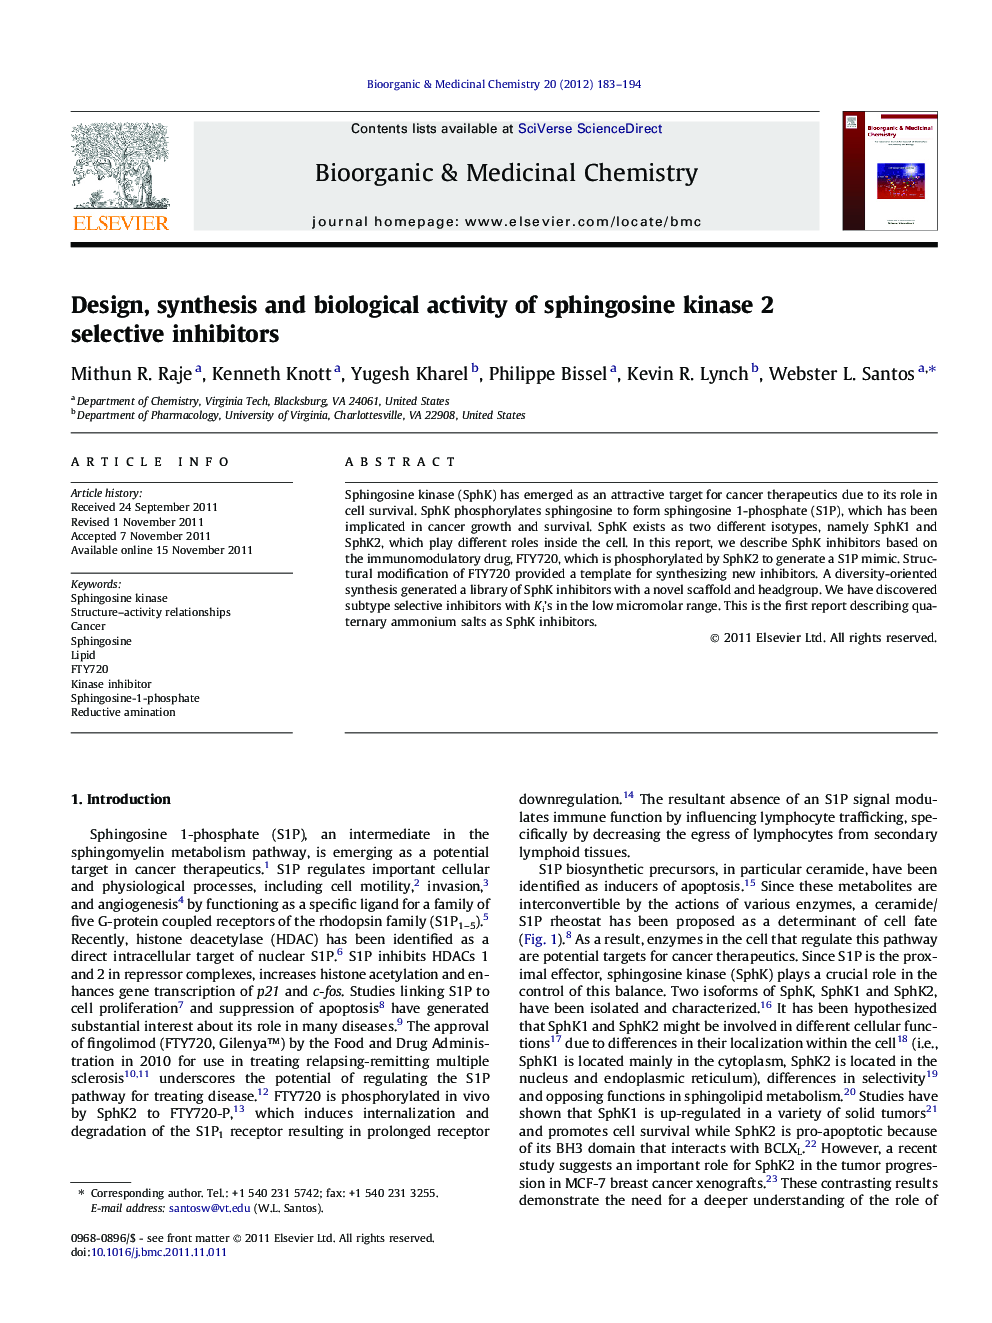 Design, synthesis and biological activity of sphingosine kinase 2 selective inhibitors